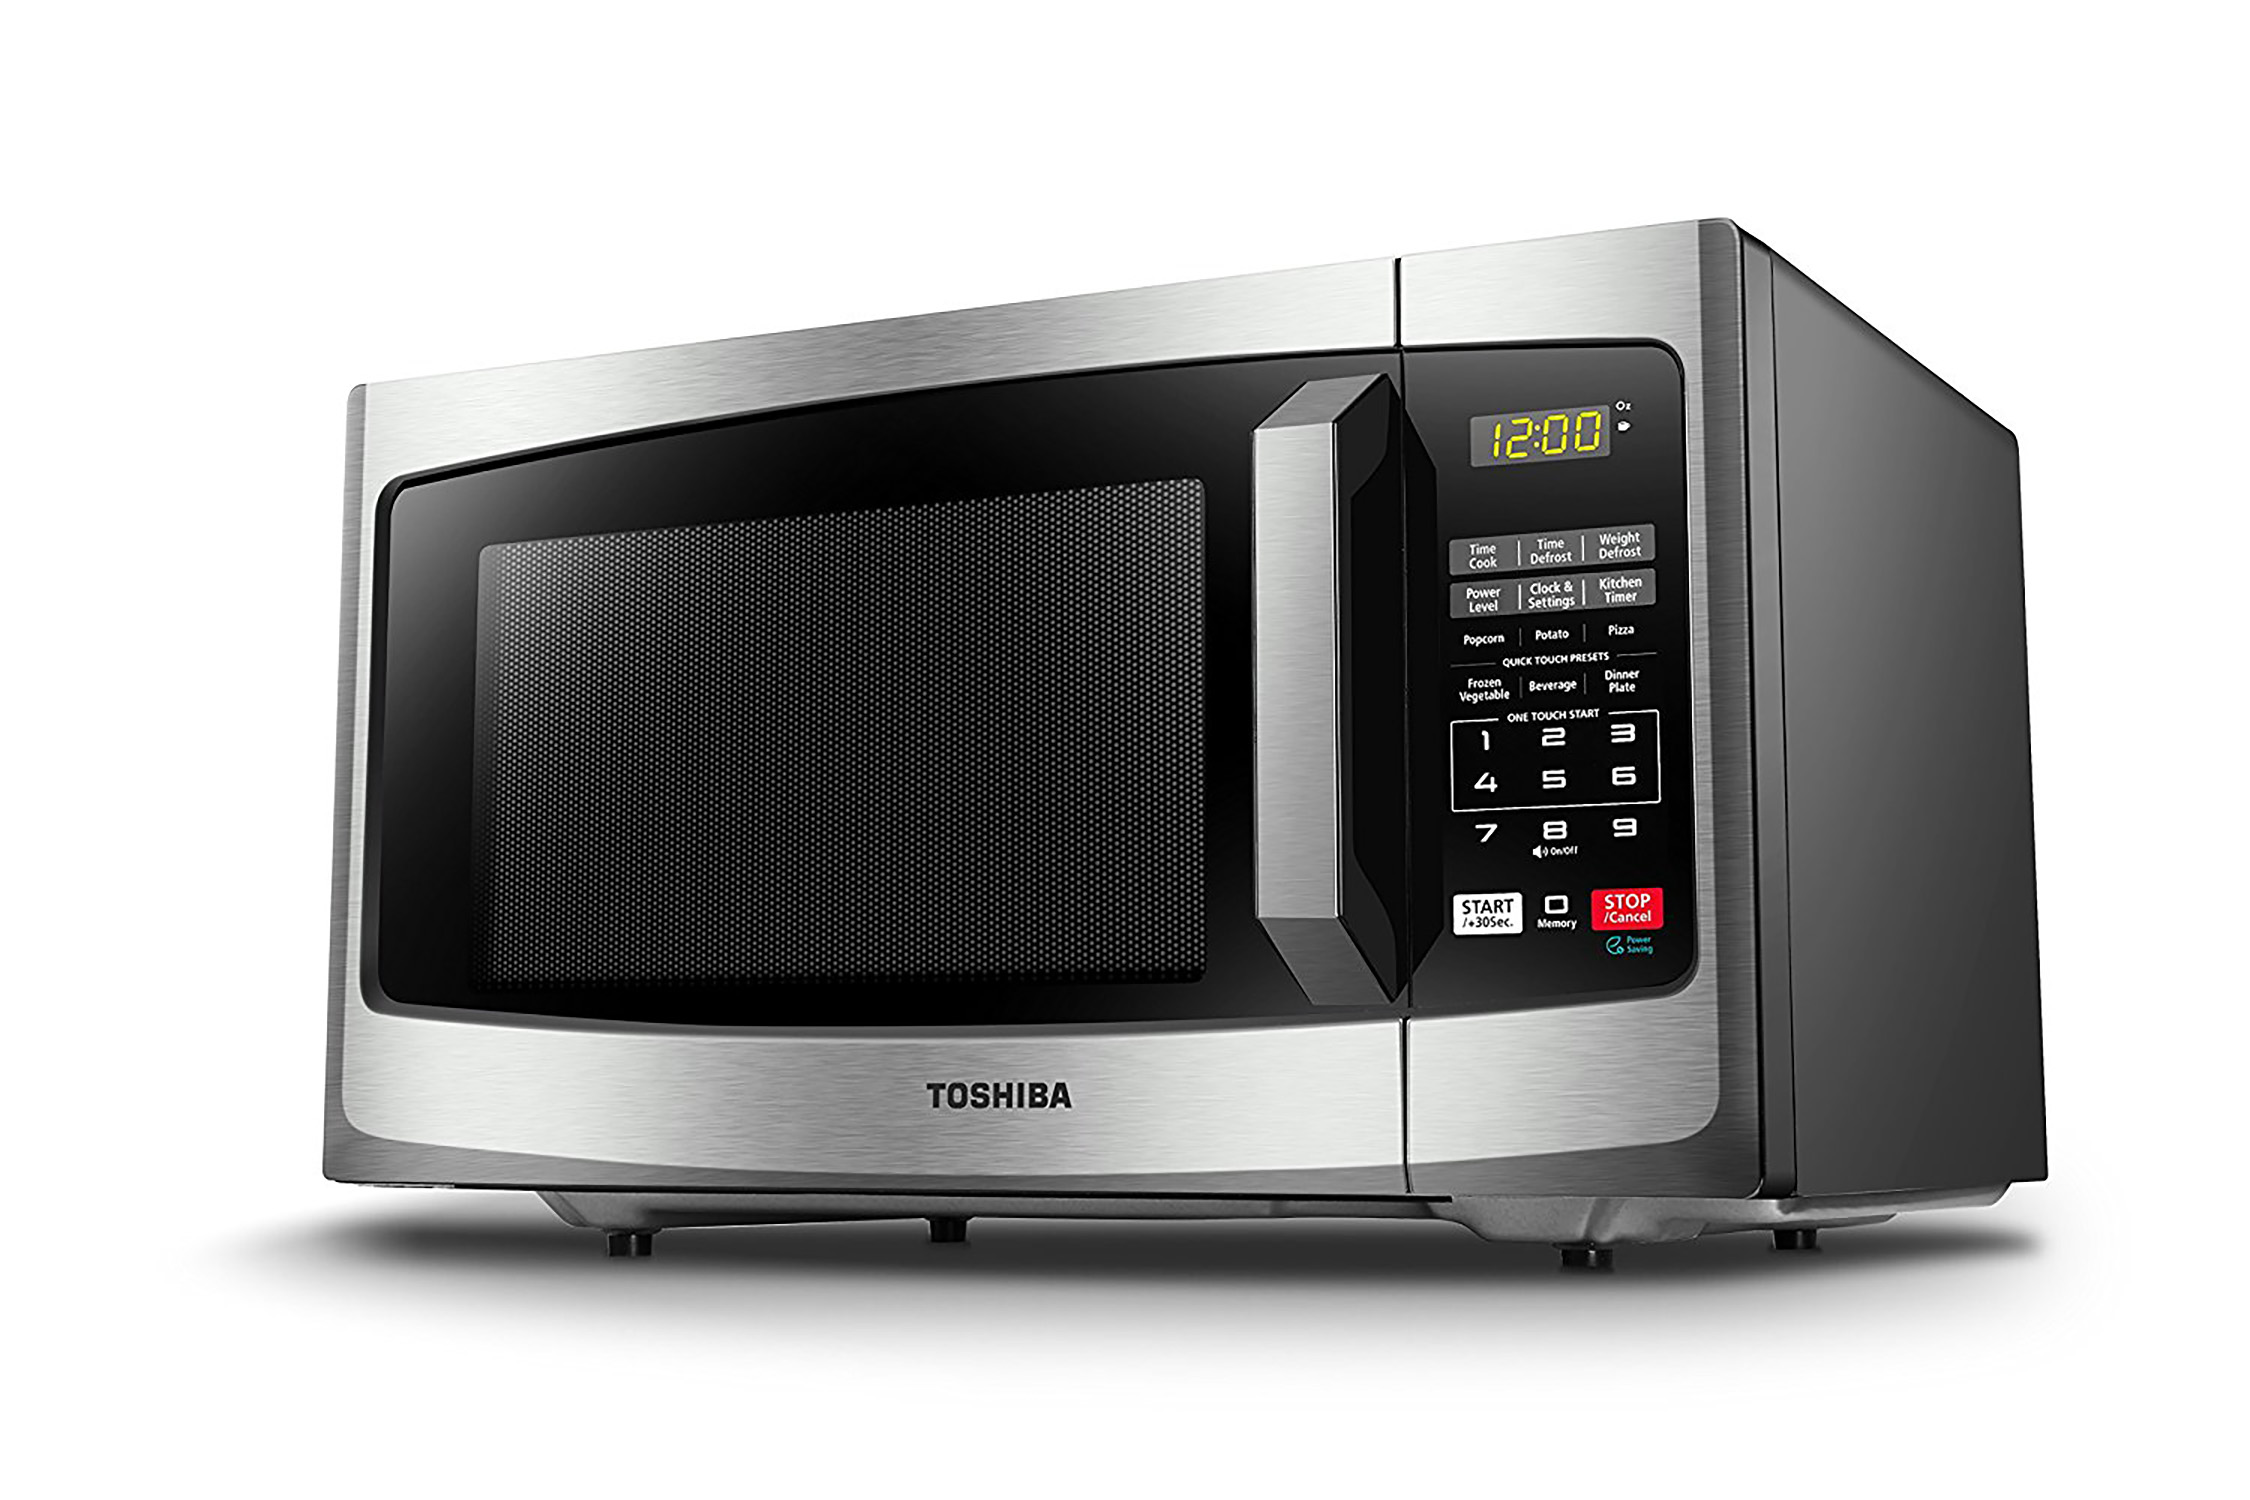 Toshiba 0.9 Cu. ft. Microwave, Stainless Steel, EM925A5A-CHSS - image 4 of 10